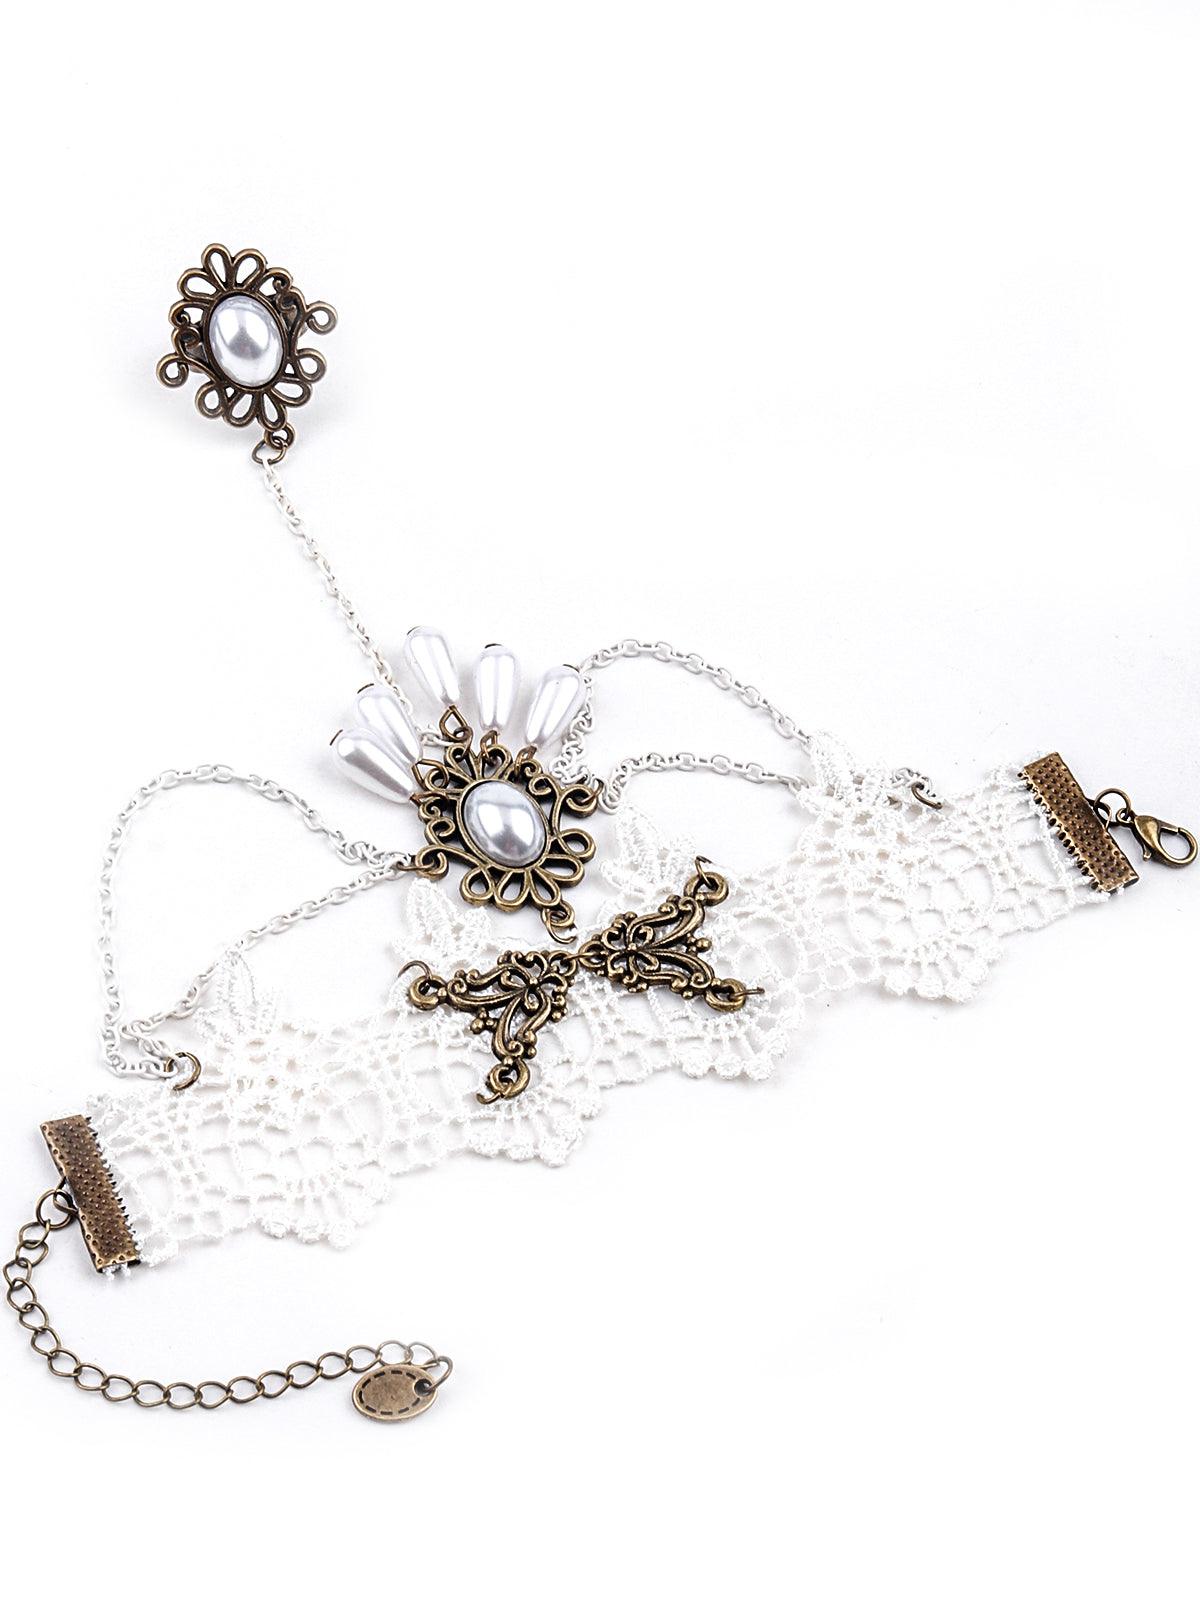 White lace bracelet secured with a ring chain - Odette